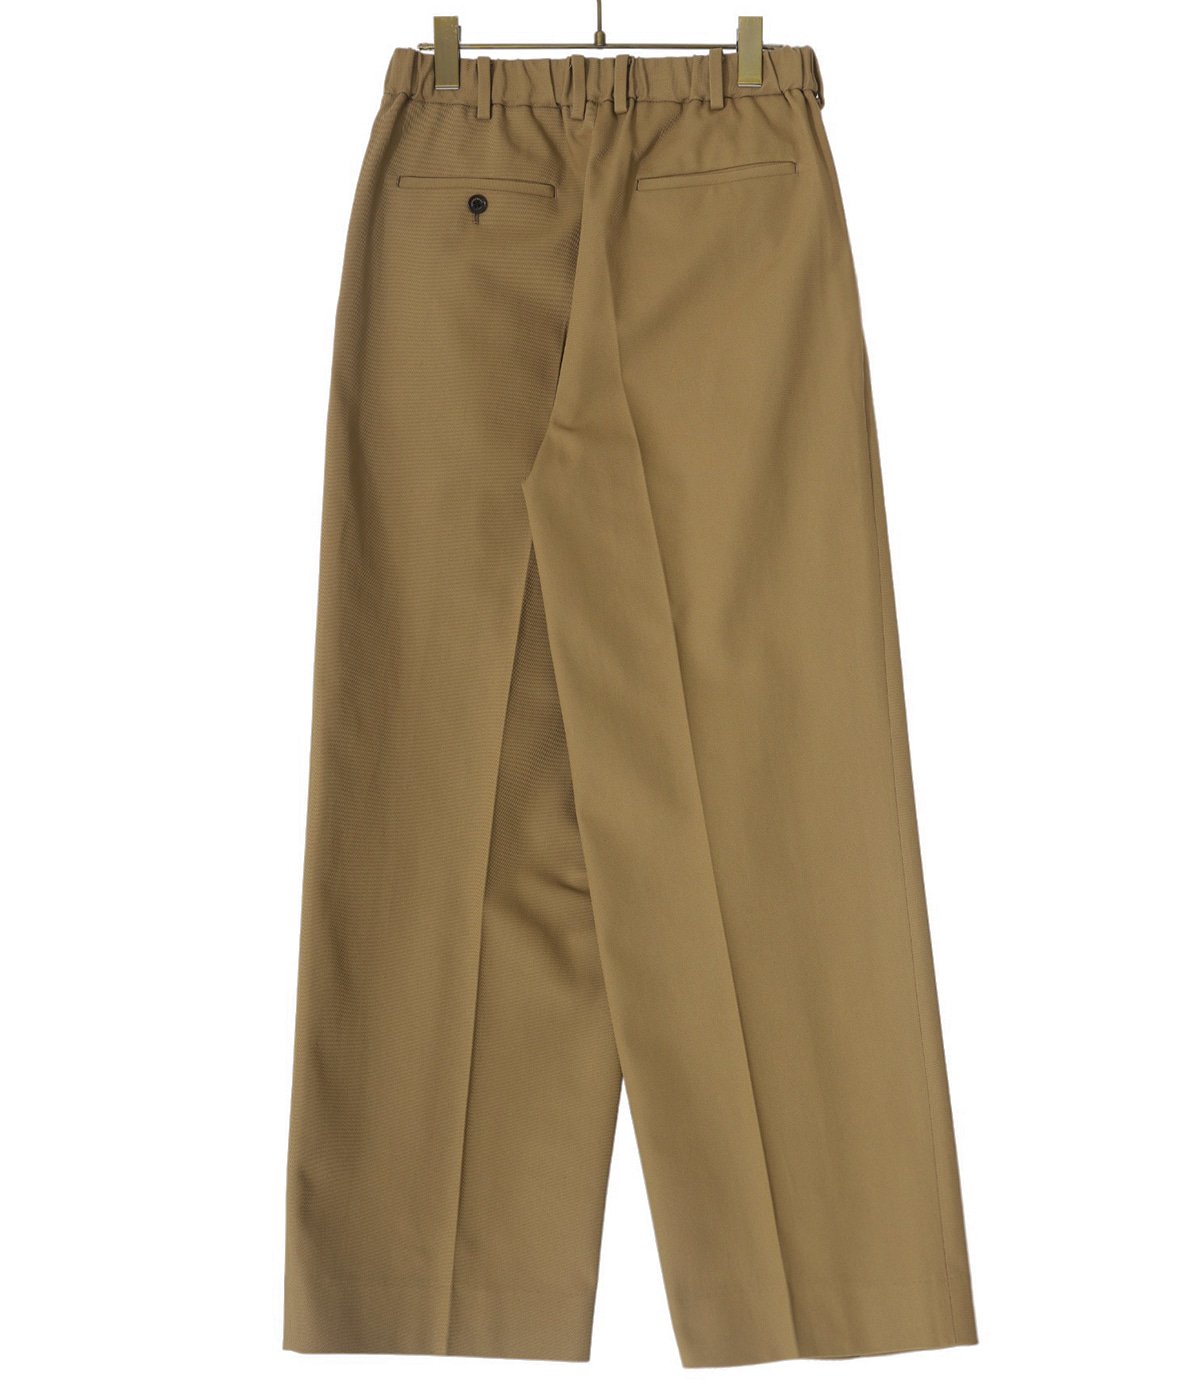 ORGANIC COTTON SURVIVAL CLOTH CLASSIC FIT TROUSERS